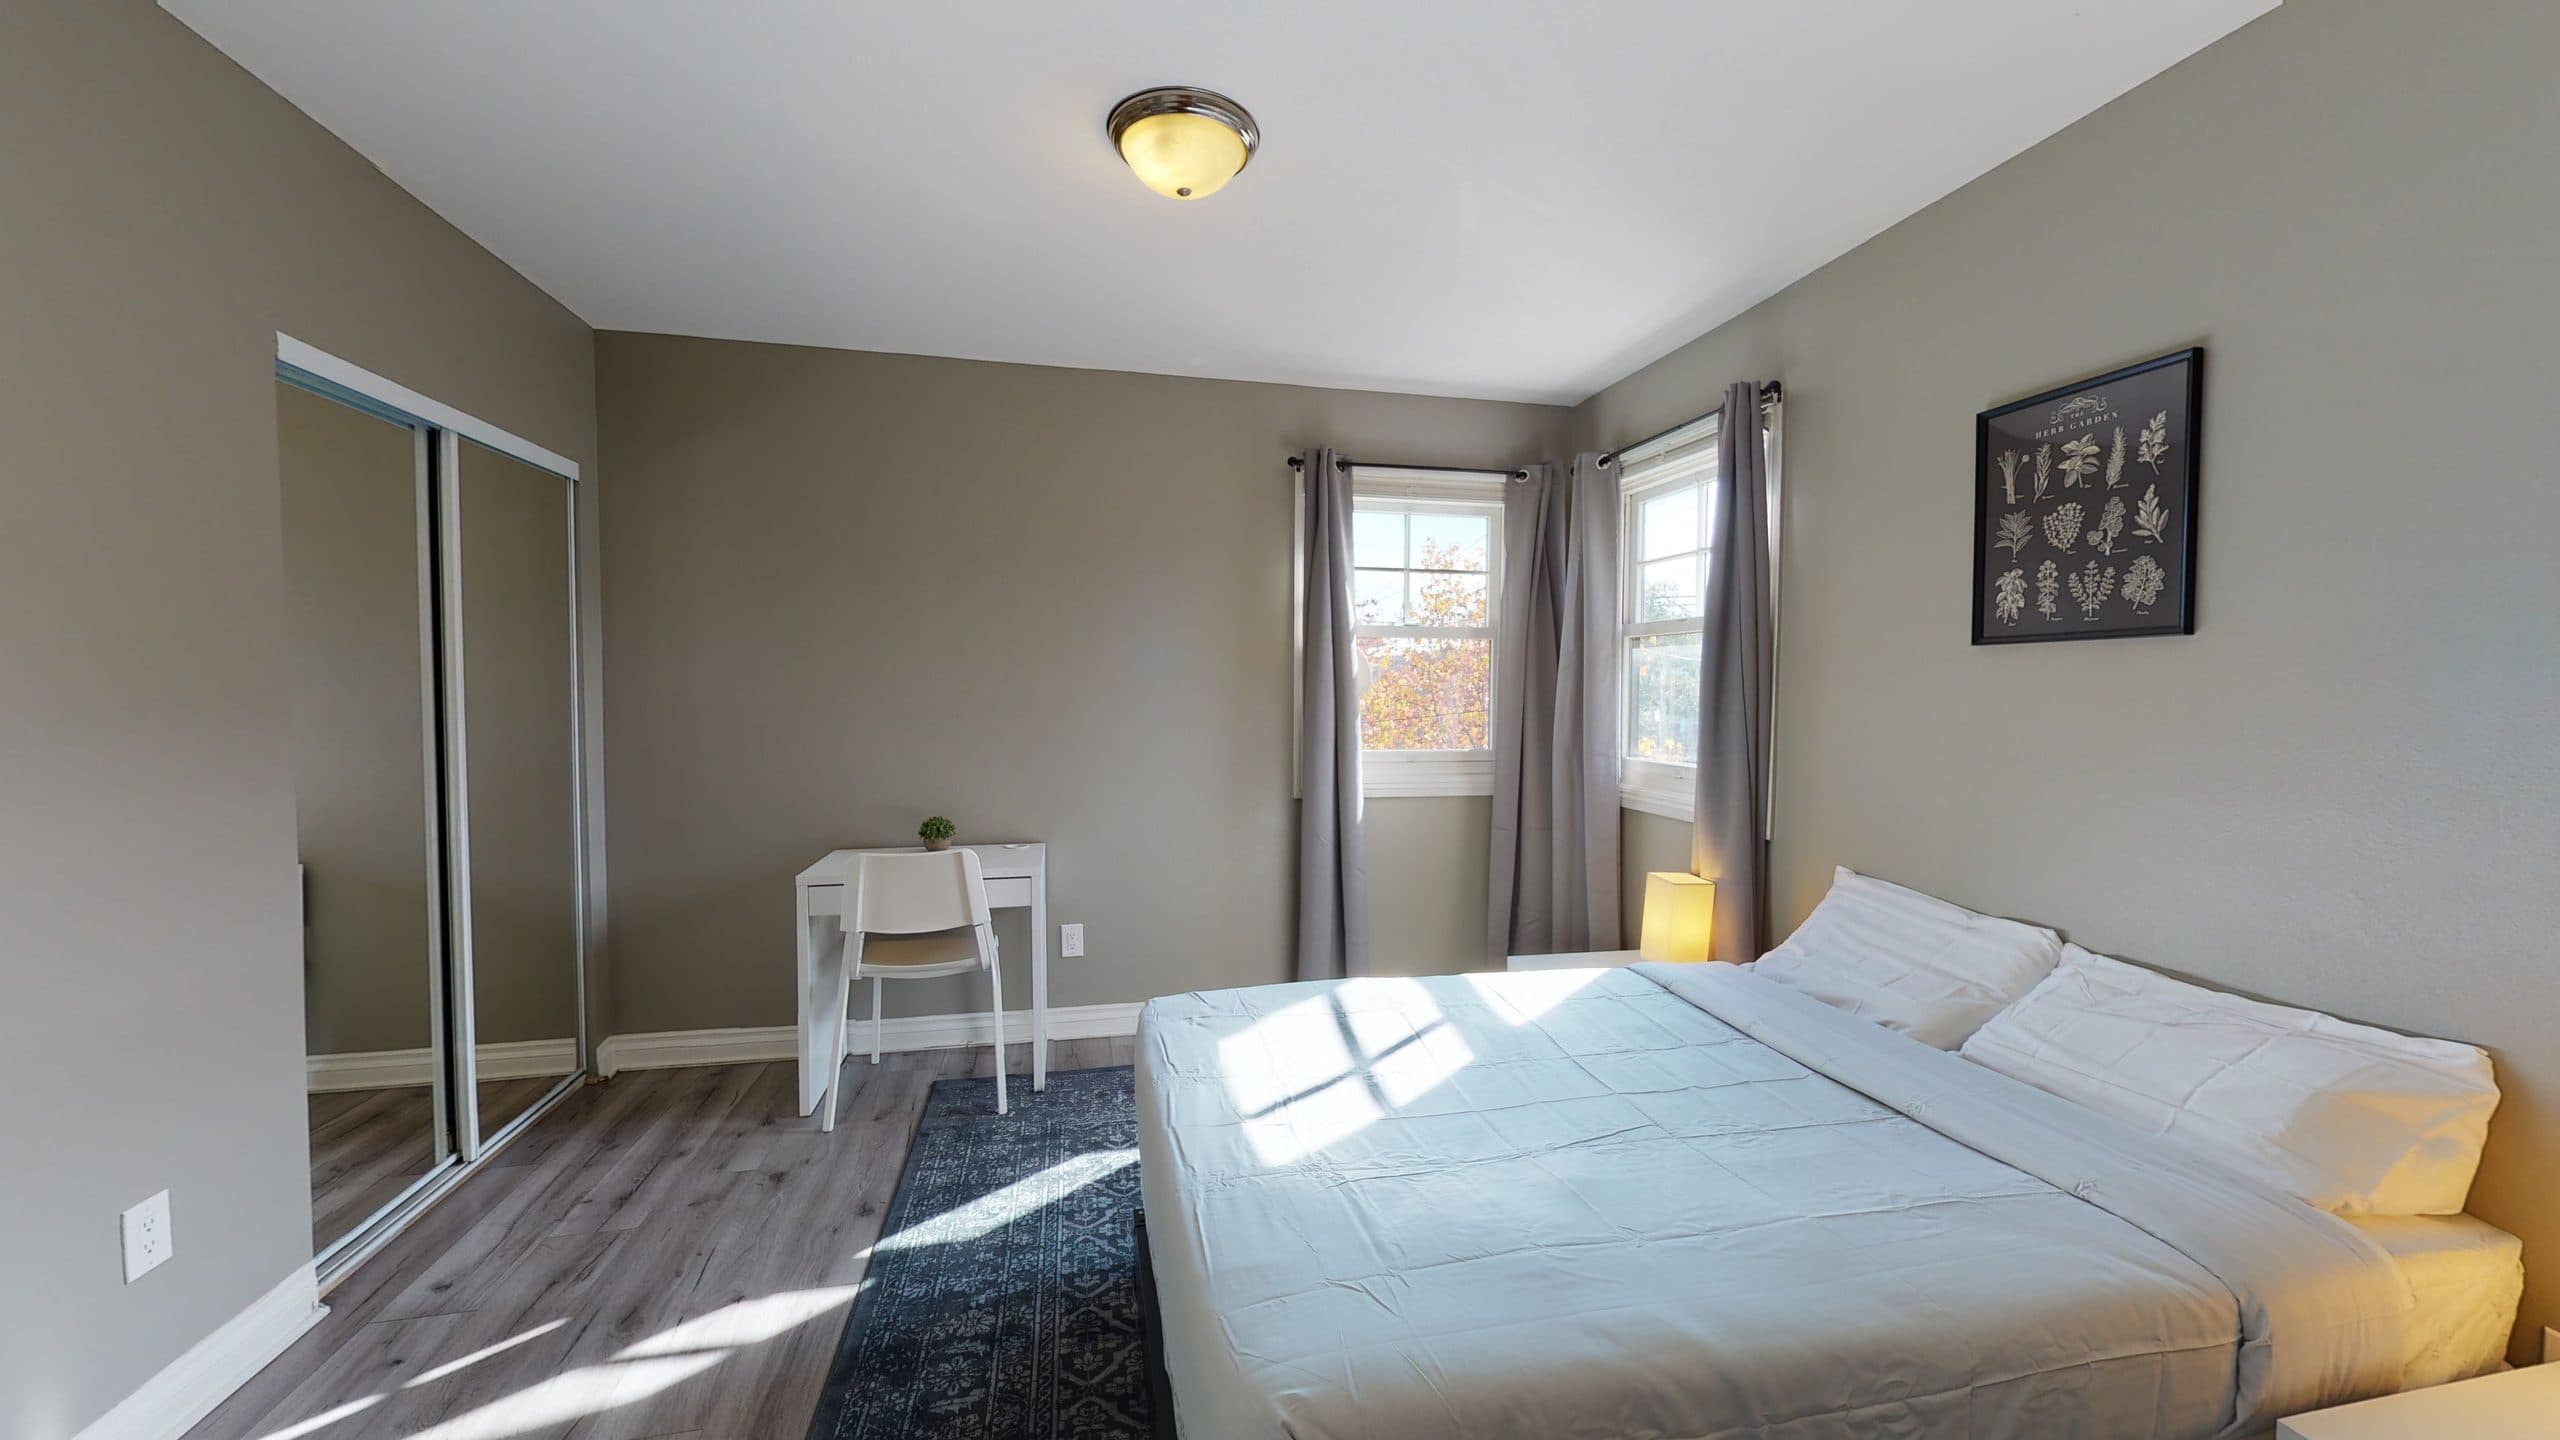 Photo 22 of #2445: Queen Bedroom A (Furnished only) at June Homes